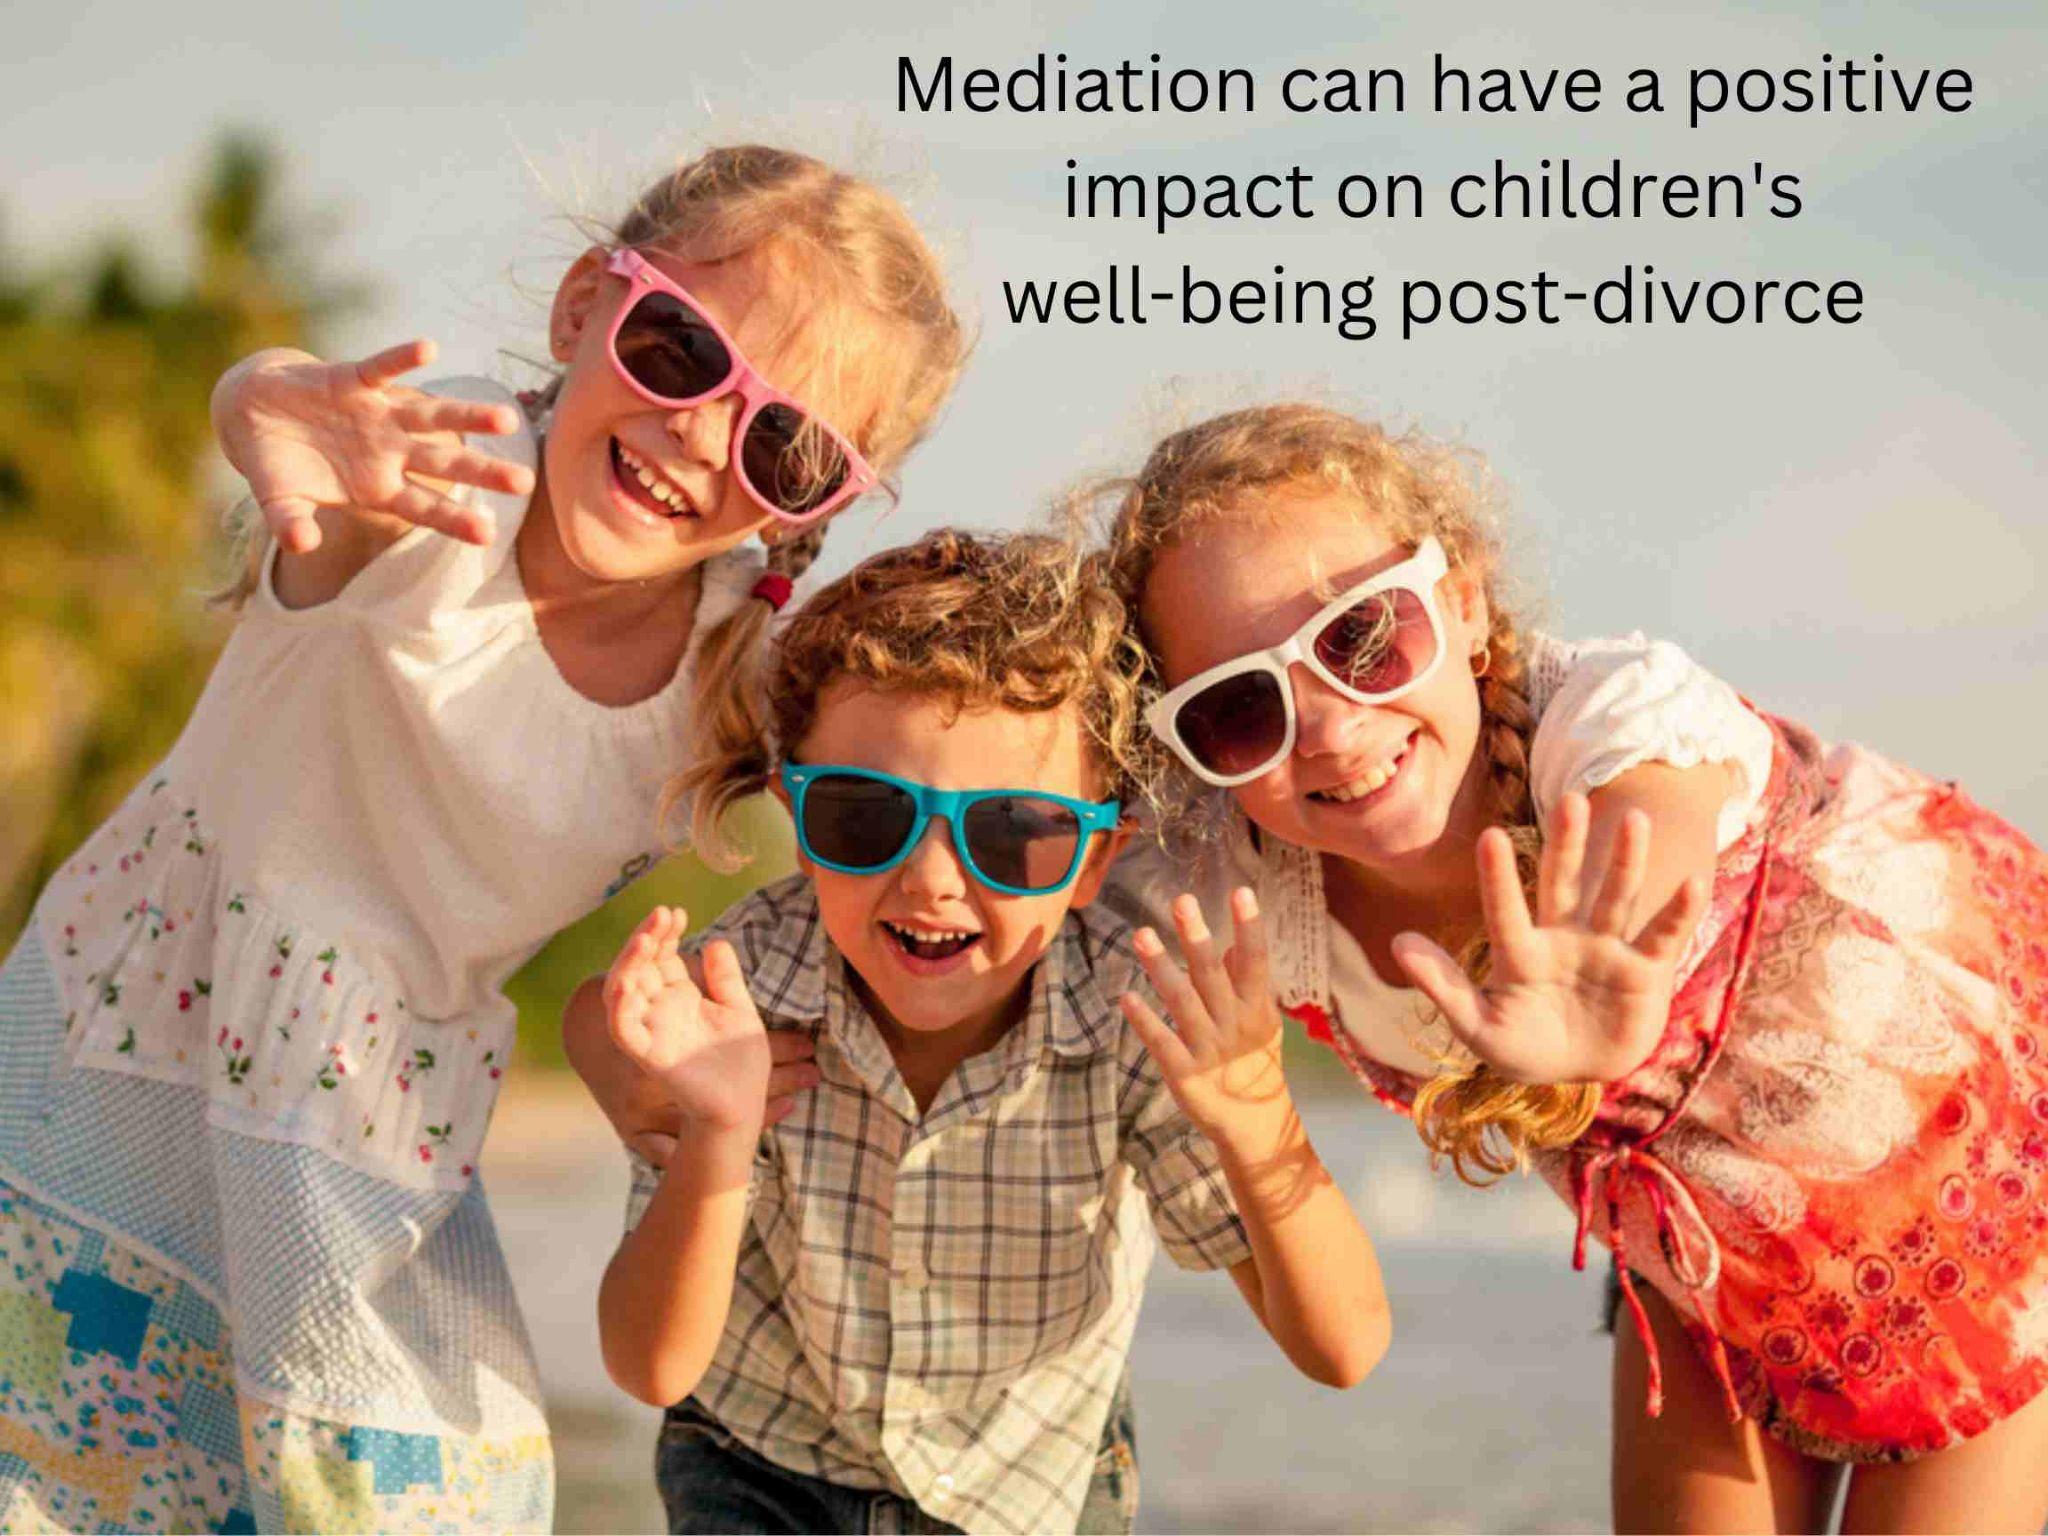 Three children wearing sunglasses smile and wave at the camera on a sunny day. Text on the image reads, "Mediation can have a positive impact on children's well-being post-divorce, offering a peaceful path forward.